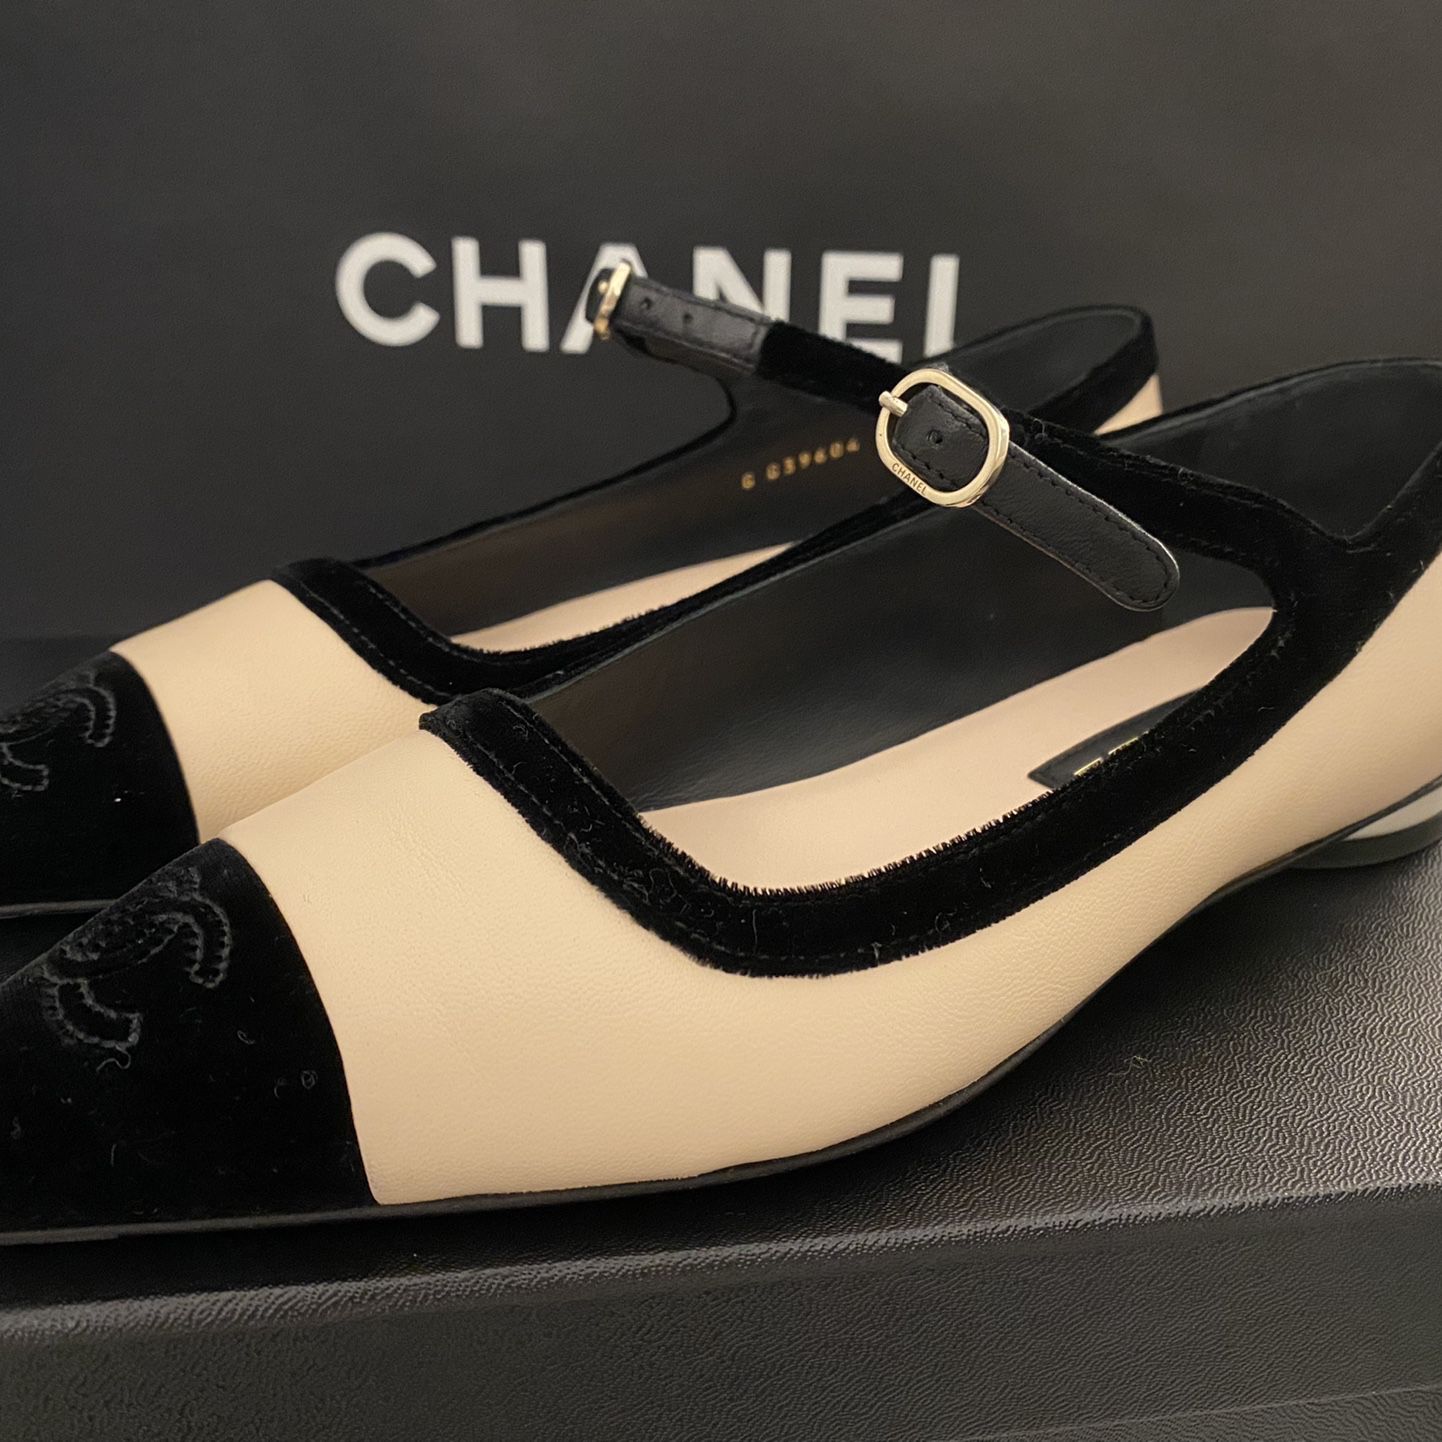 22/23 Authentic Chanel Pointed Flats for Sale in Miami, FL - OfferUp